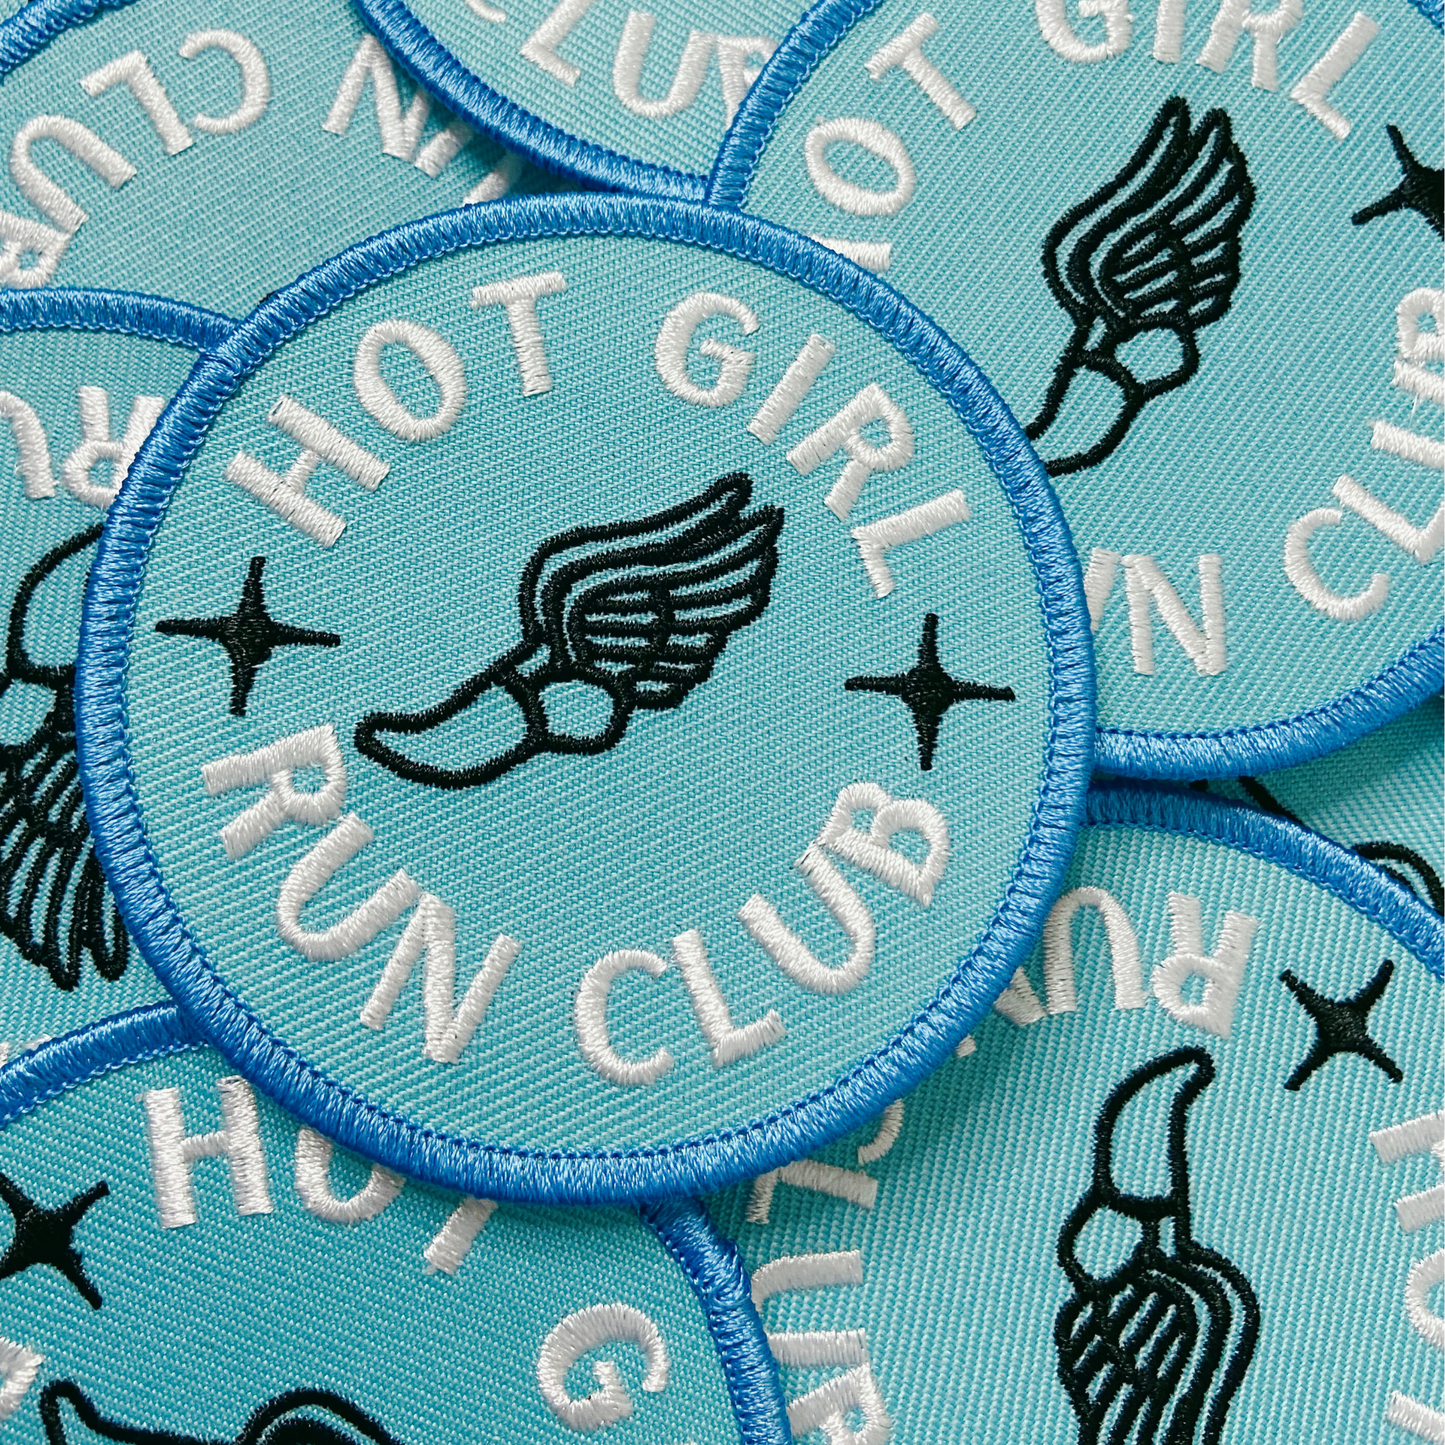 3" Hot Girl Run Club -  Embroidered Hat Patch